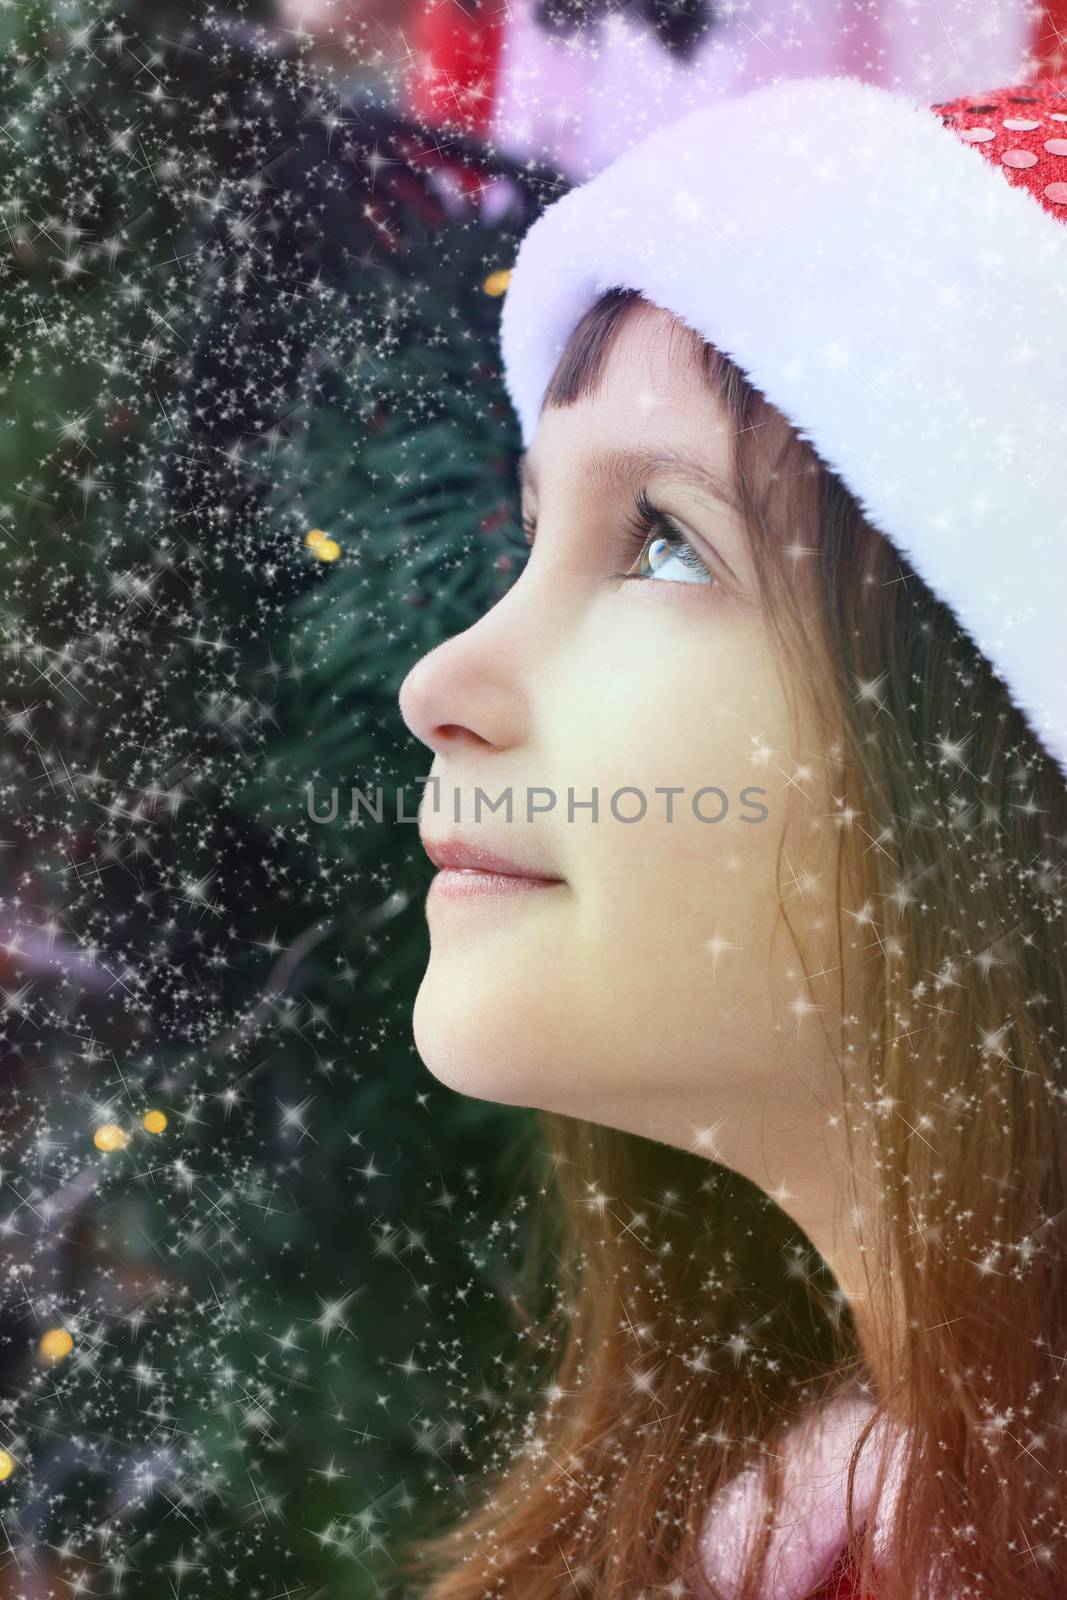 Outdoors portrait of girl looking up. Winter, Christmas time.